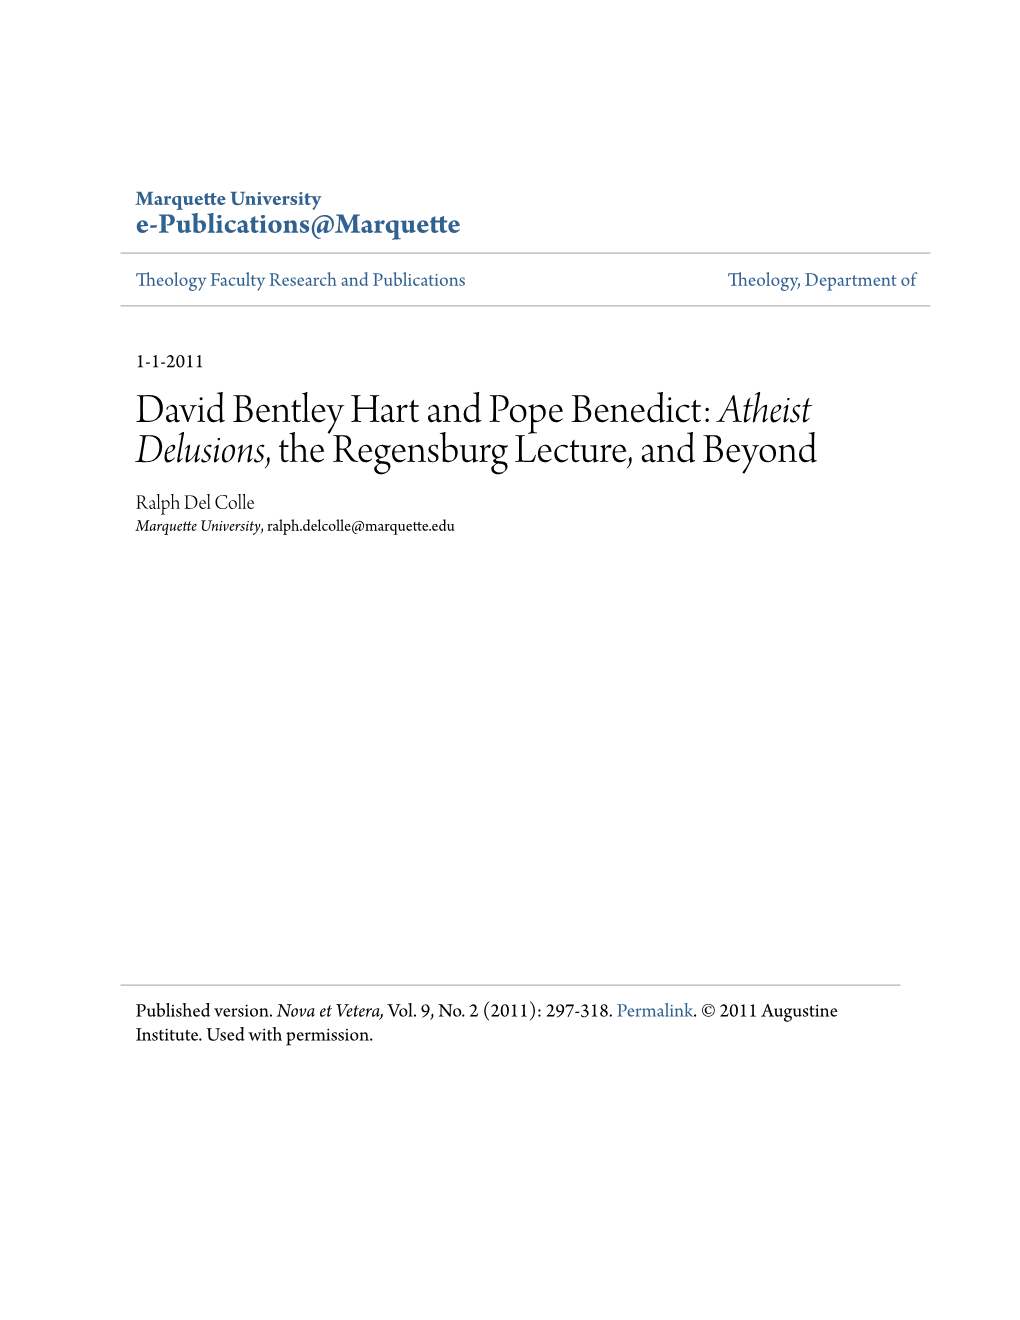 David Bentley Hart and Pope Benedict: Atheist Delusions, the Regensburg Lecture, and Beyond Ralph Del Colle Marquette University, Ralph.Delcolle@Marquette.Edu